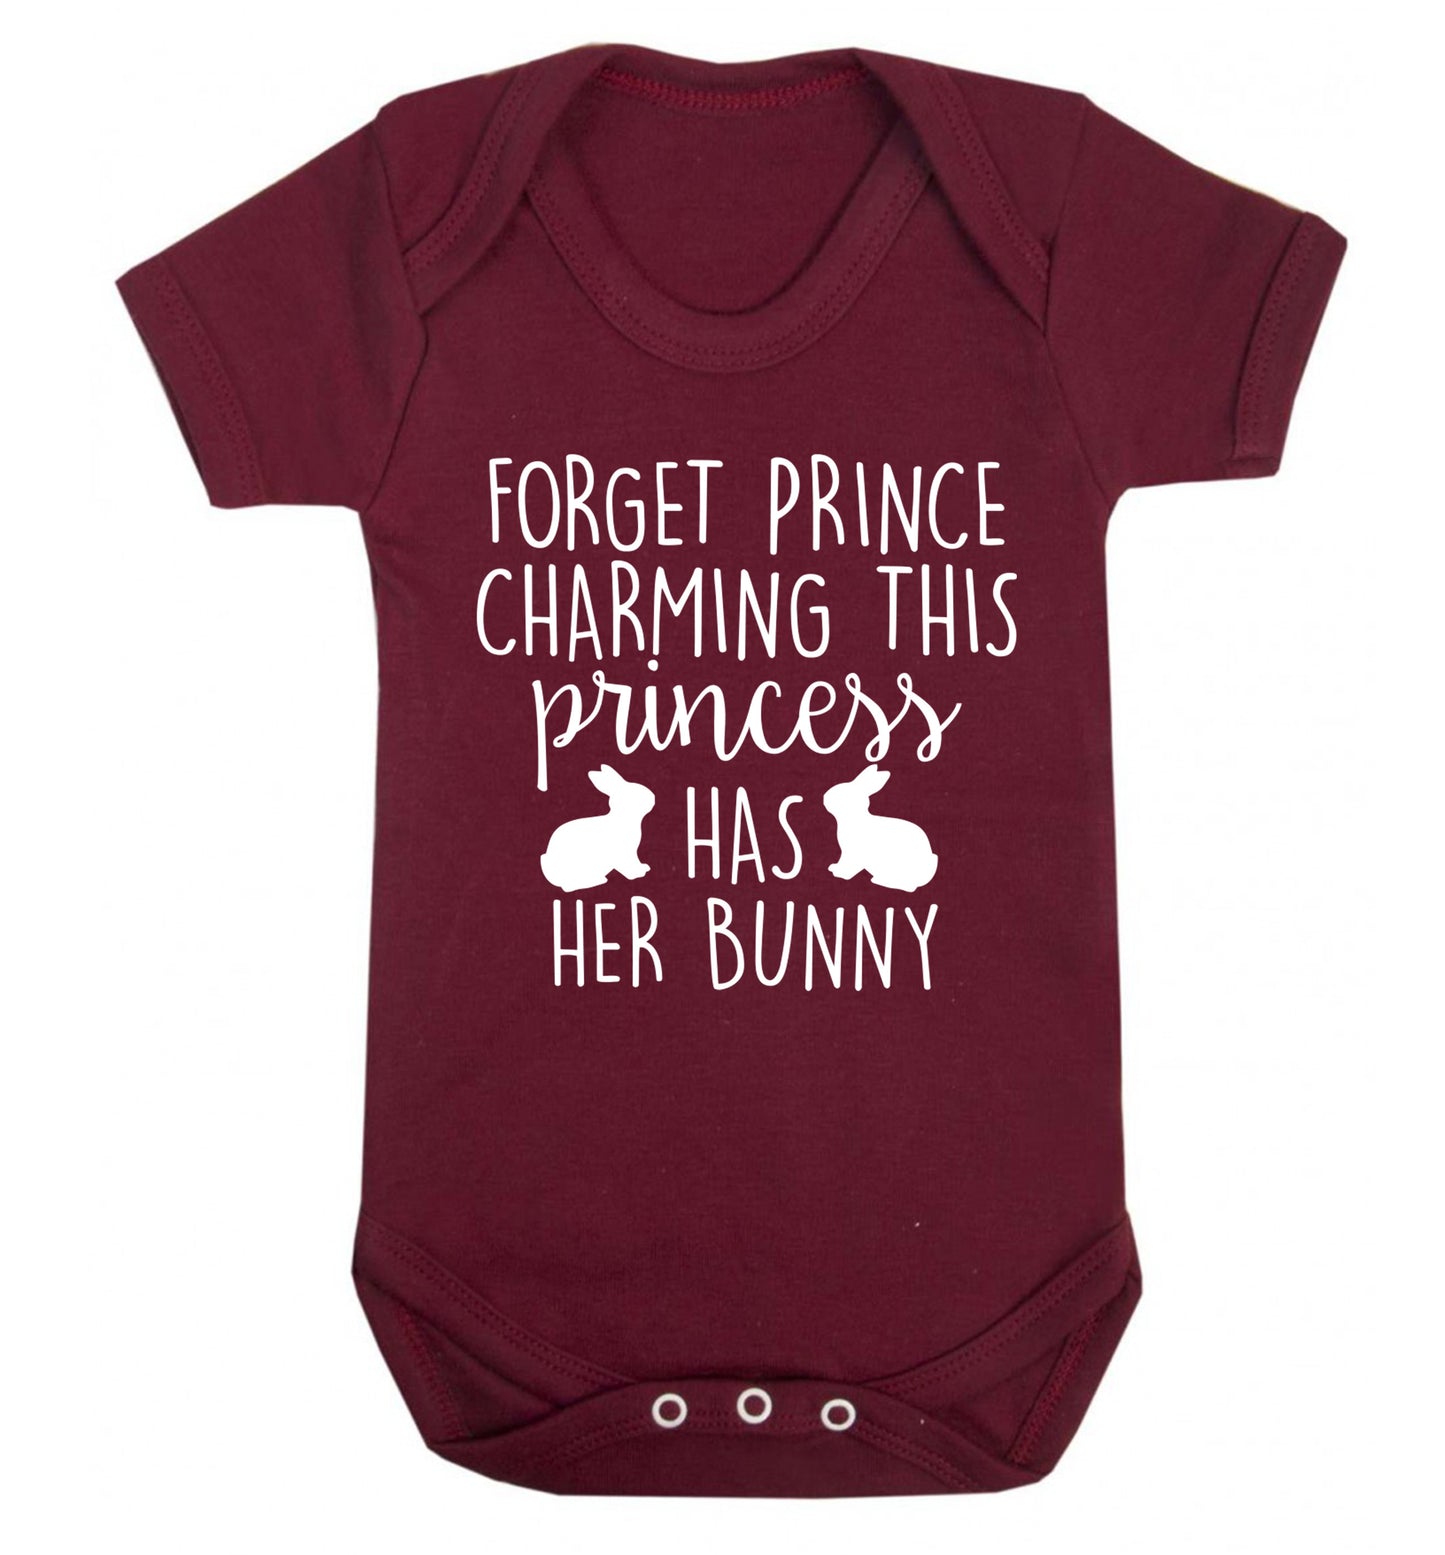 Forget prince charming this princess has her bunny Baby Vest maroon 18-24 months